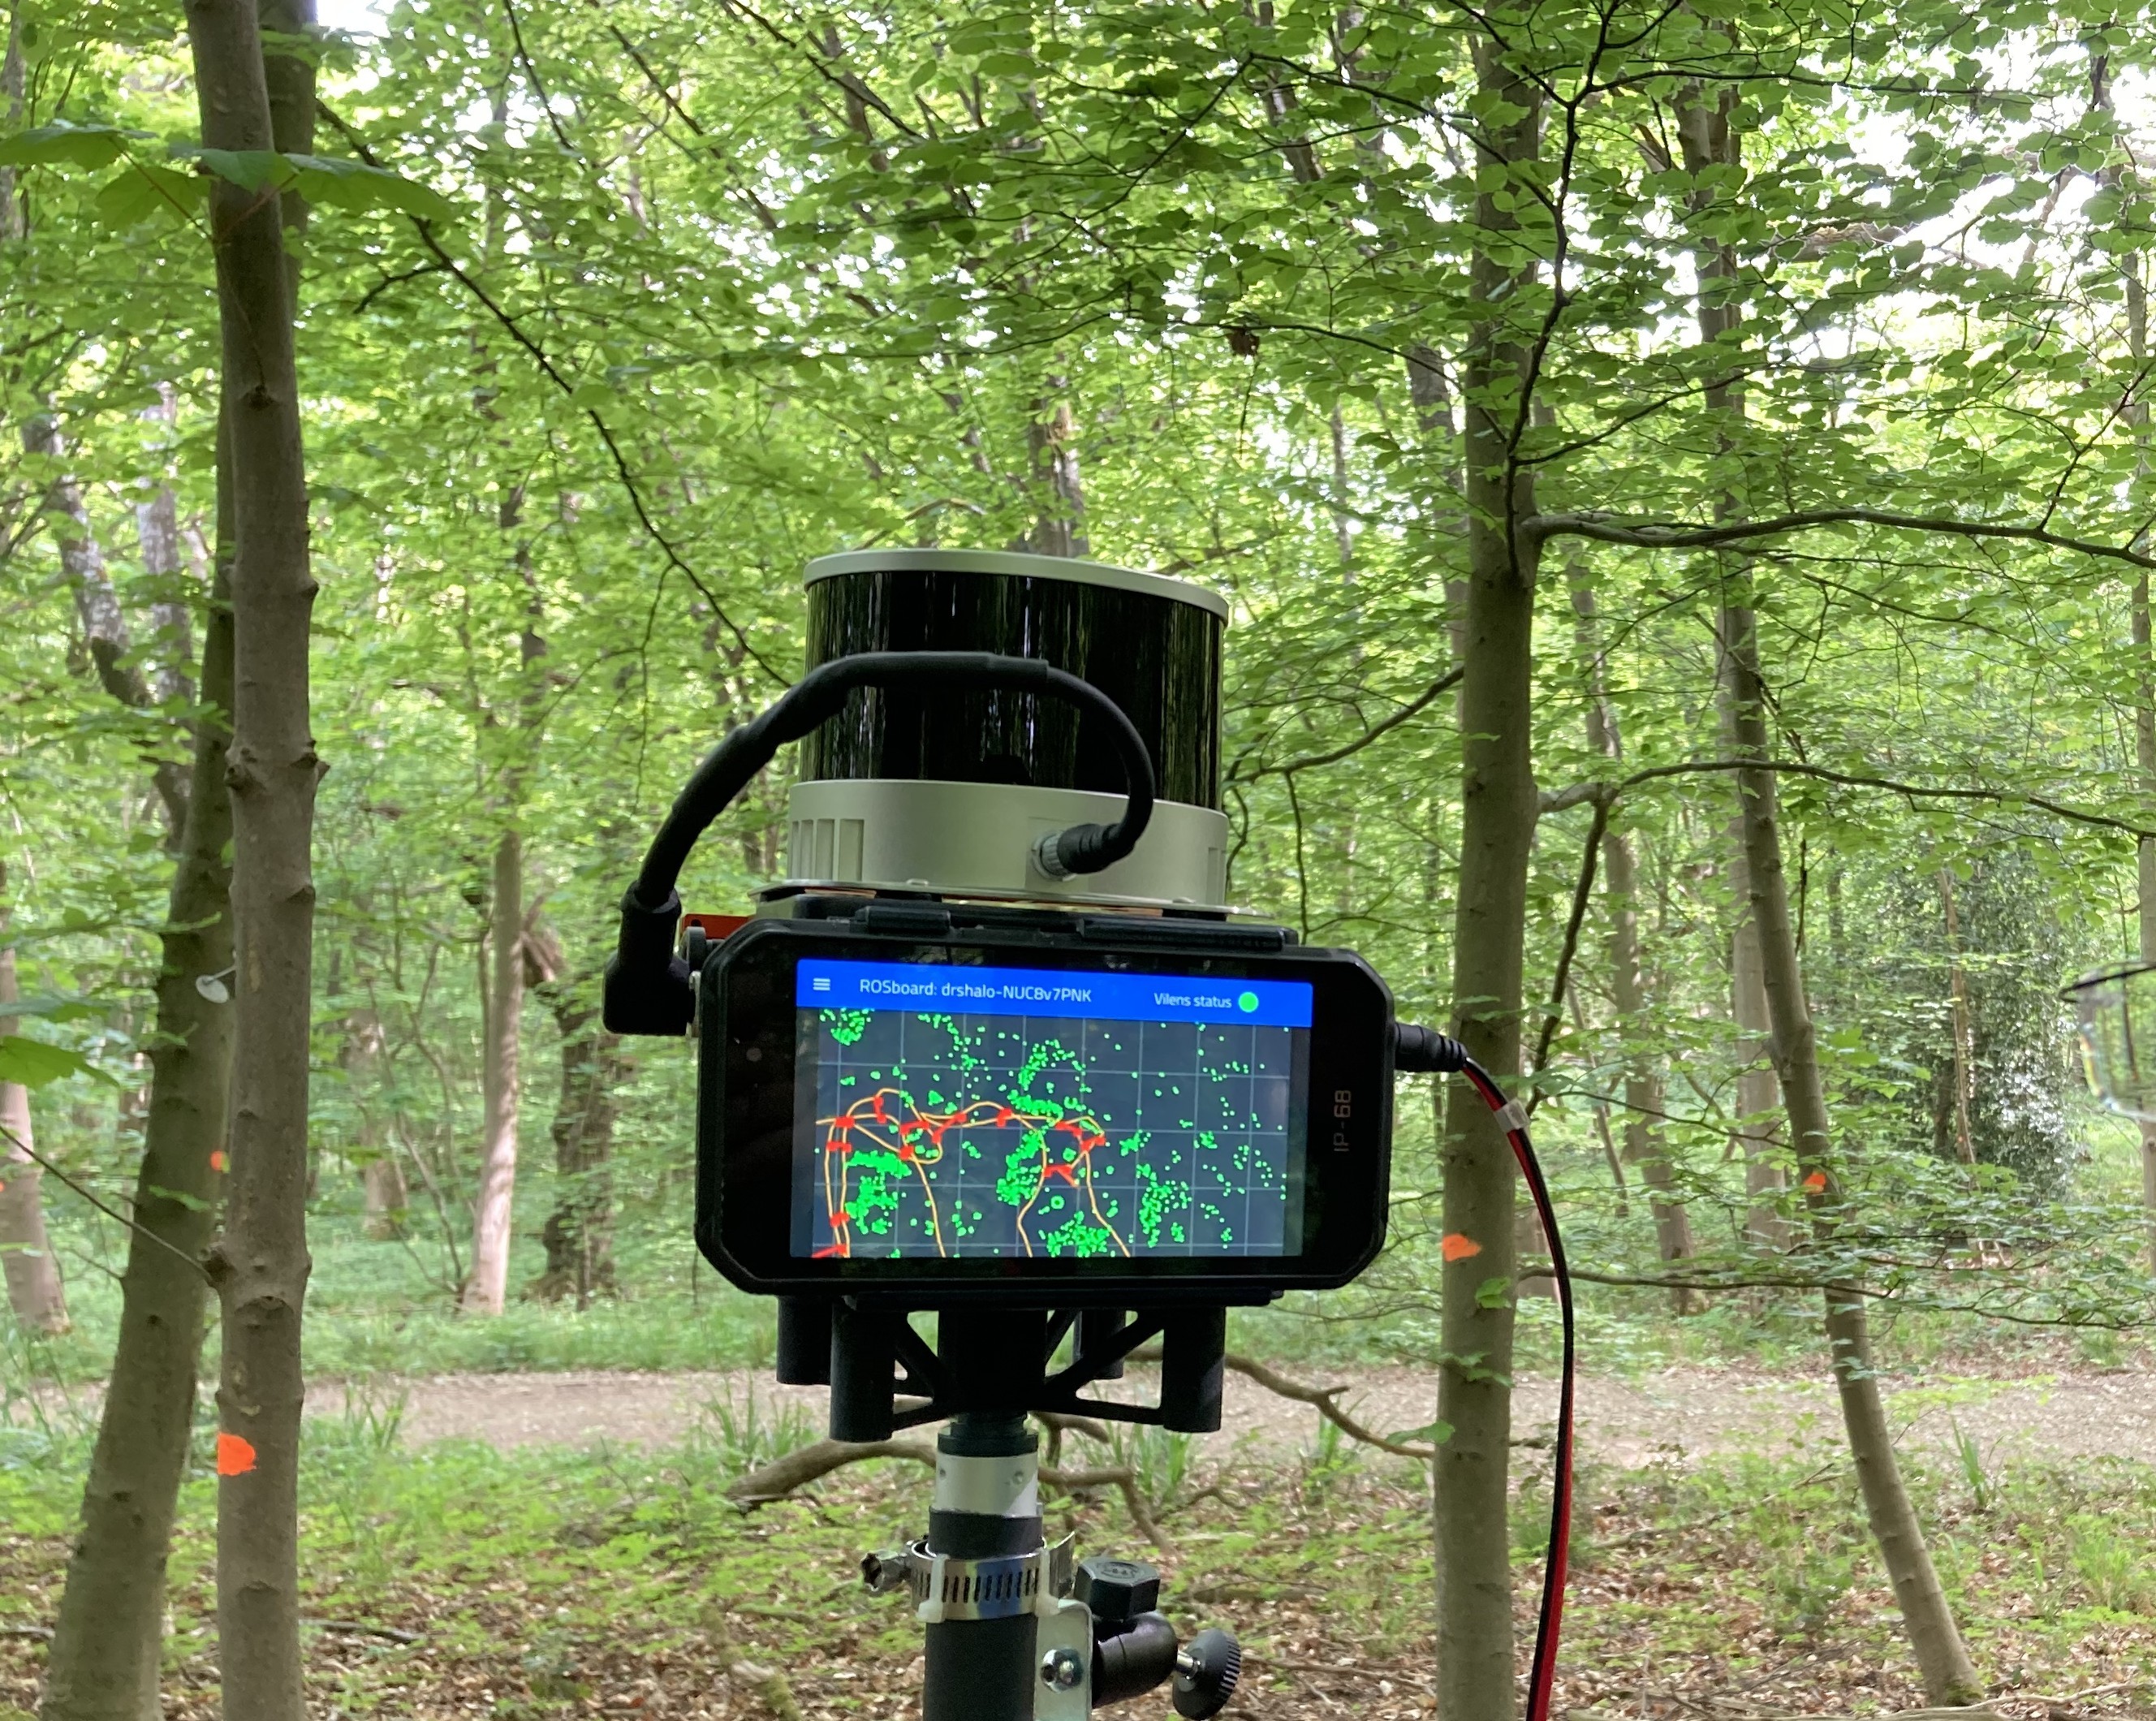 Handheld frontier in a forest